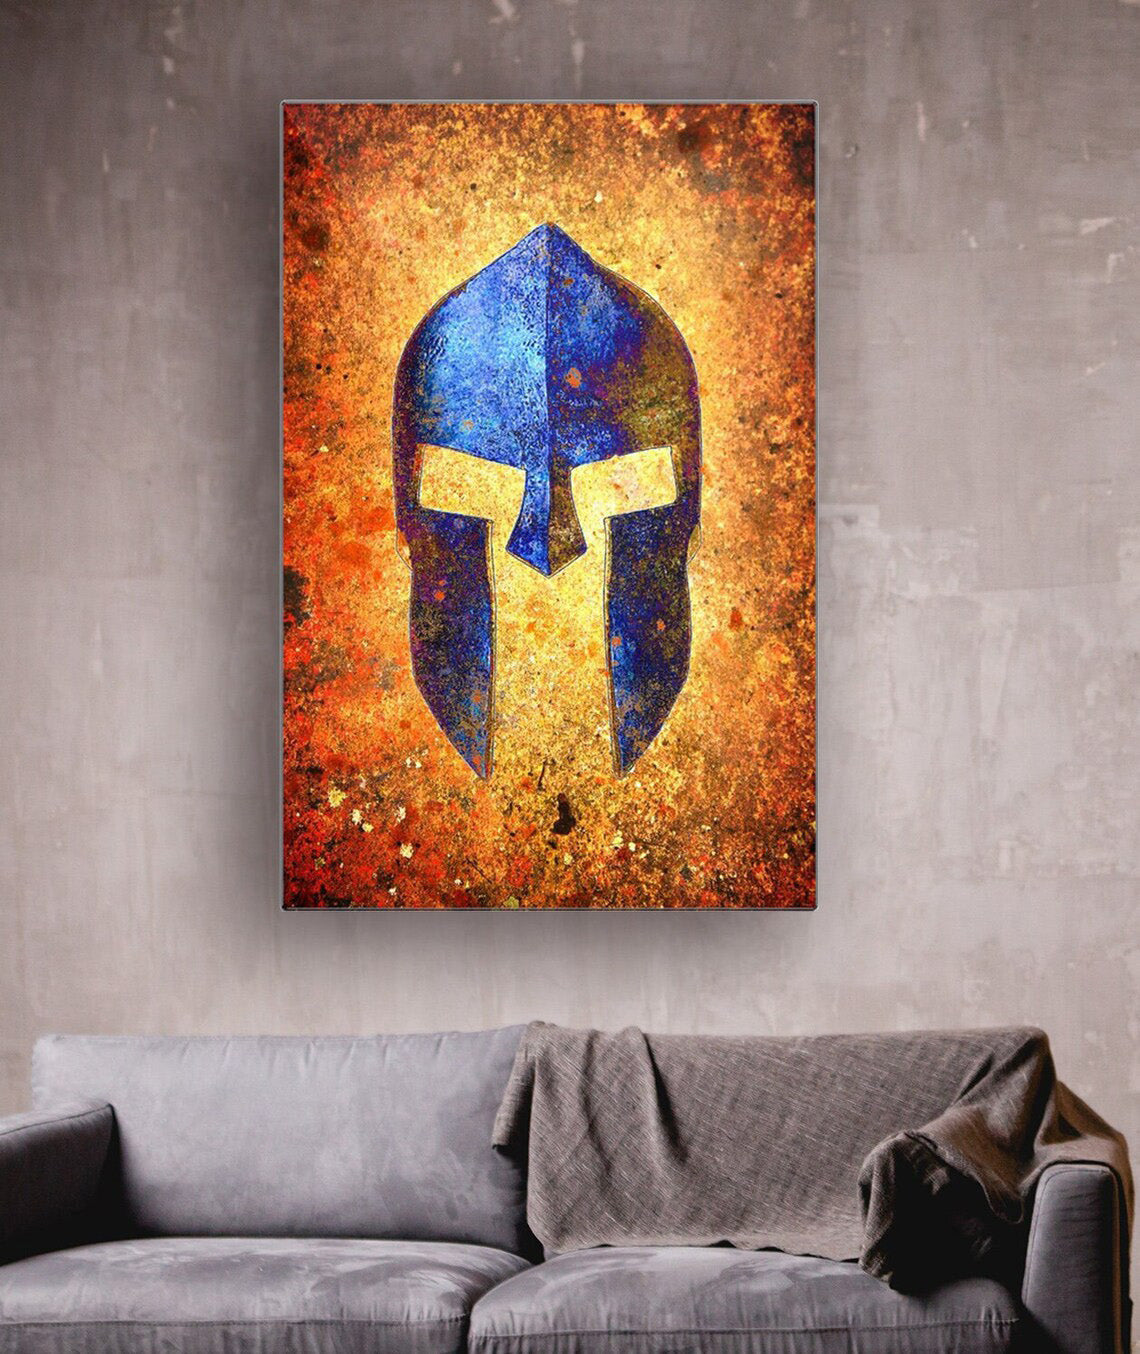 Warrior Themed Decor - Blue Spartan Helmet on Rusted Background Print on Eco Friendly Recycled Aluminum